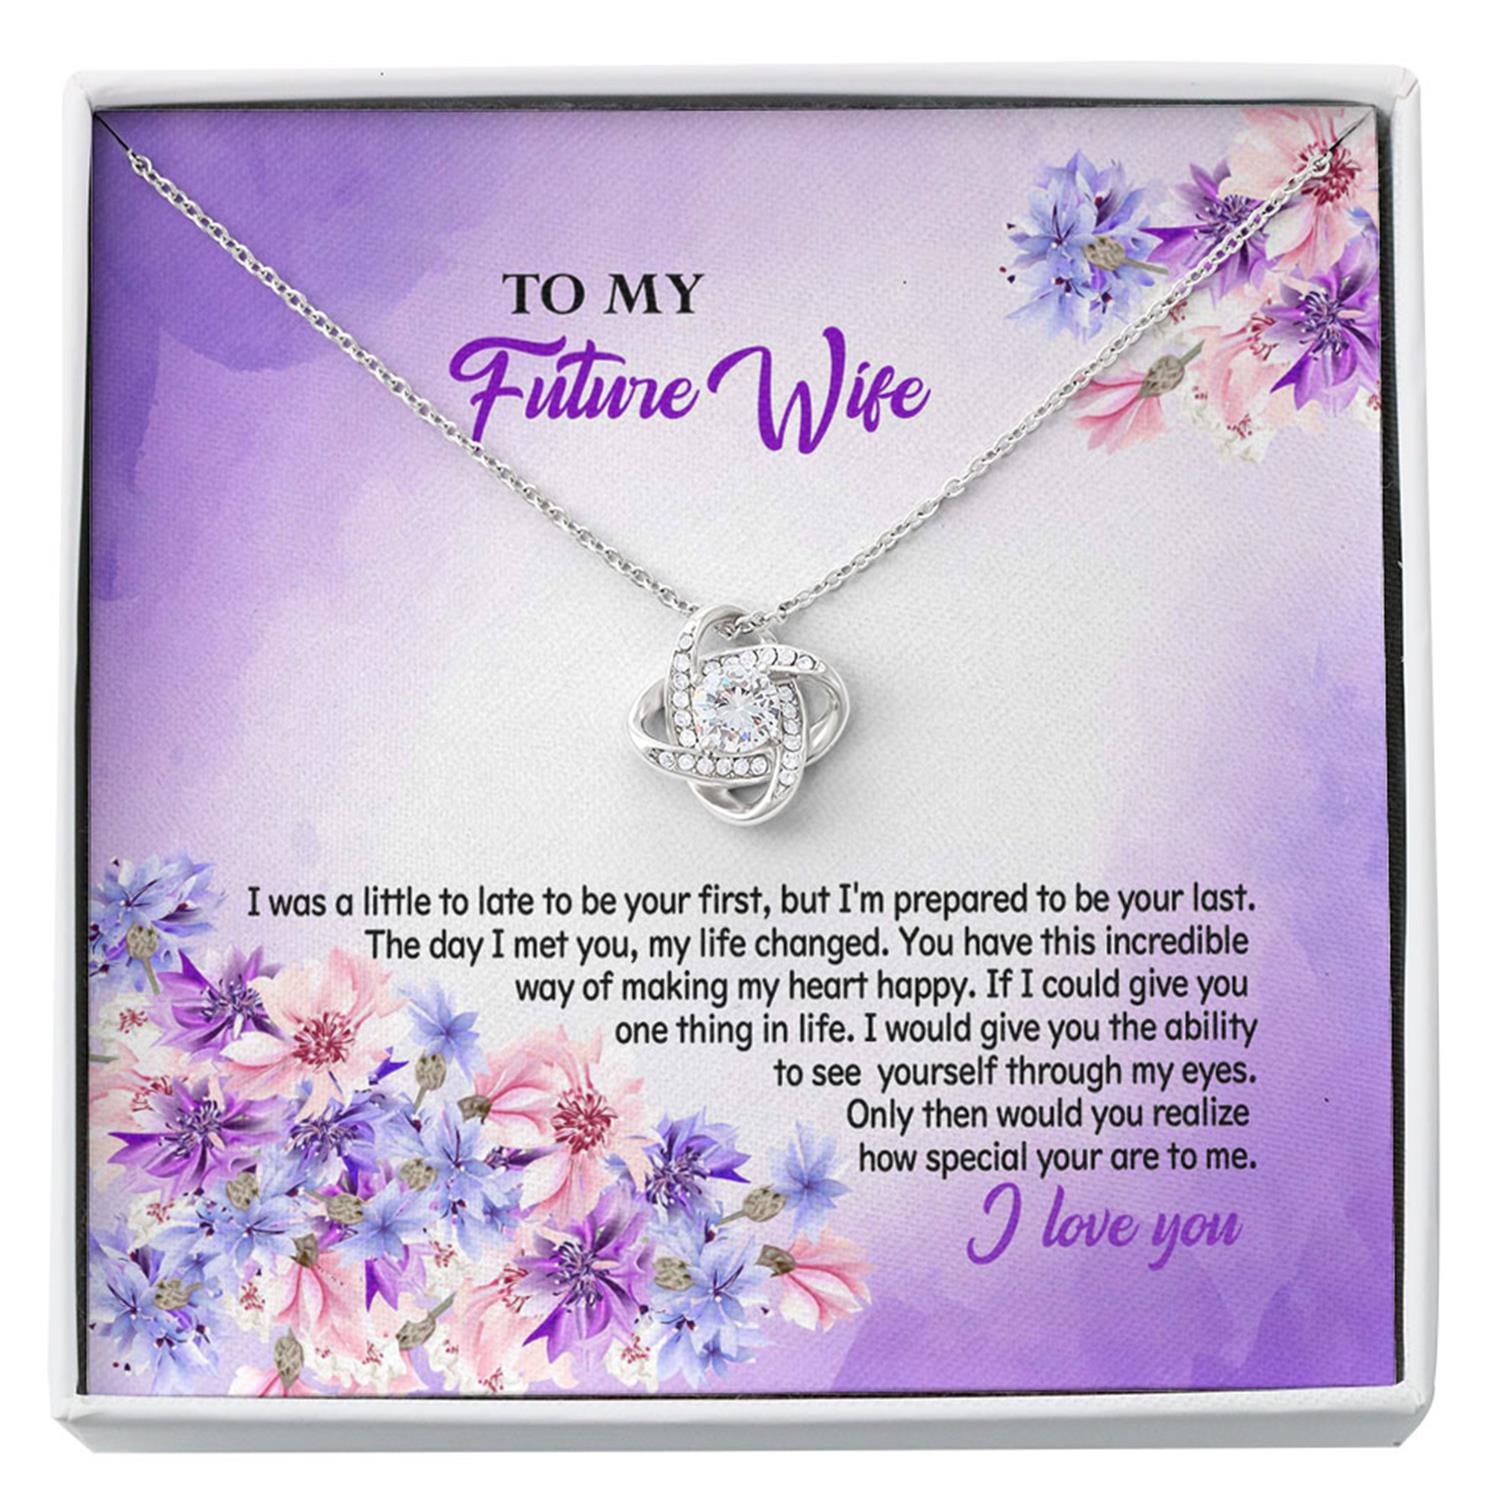 Future Wife Necklace, To My Future Wife Necklace, Last Everything Necklaces, Soulmate Jewelry Gift For Her Custom Necklace